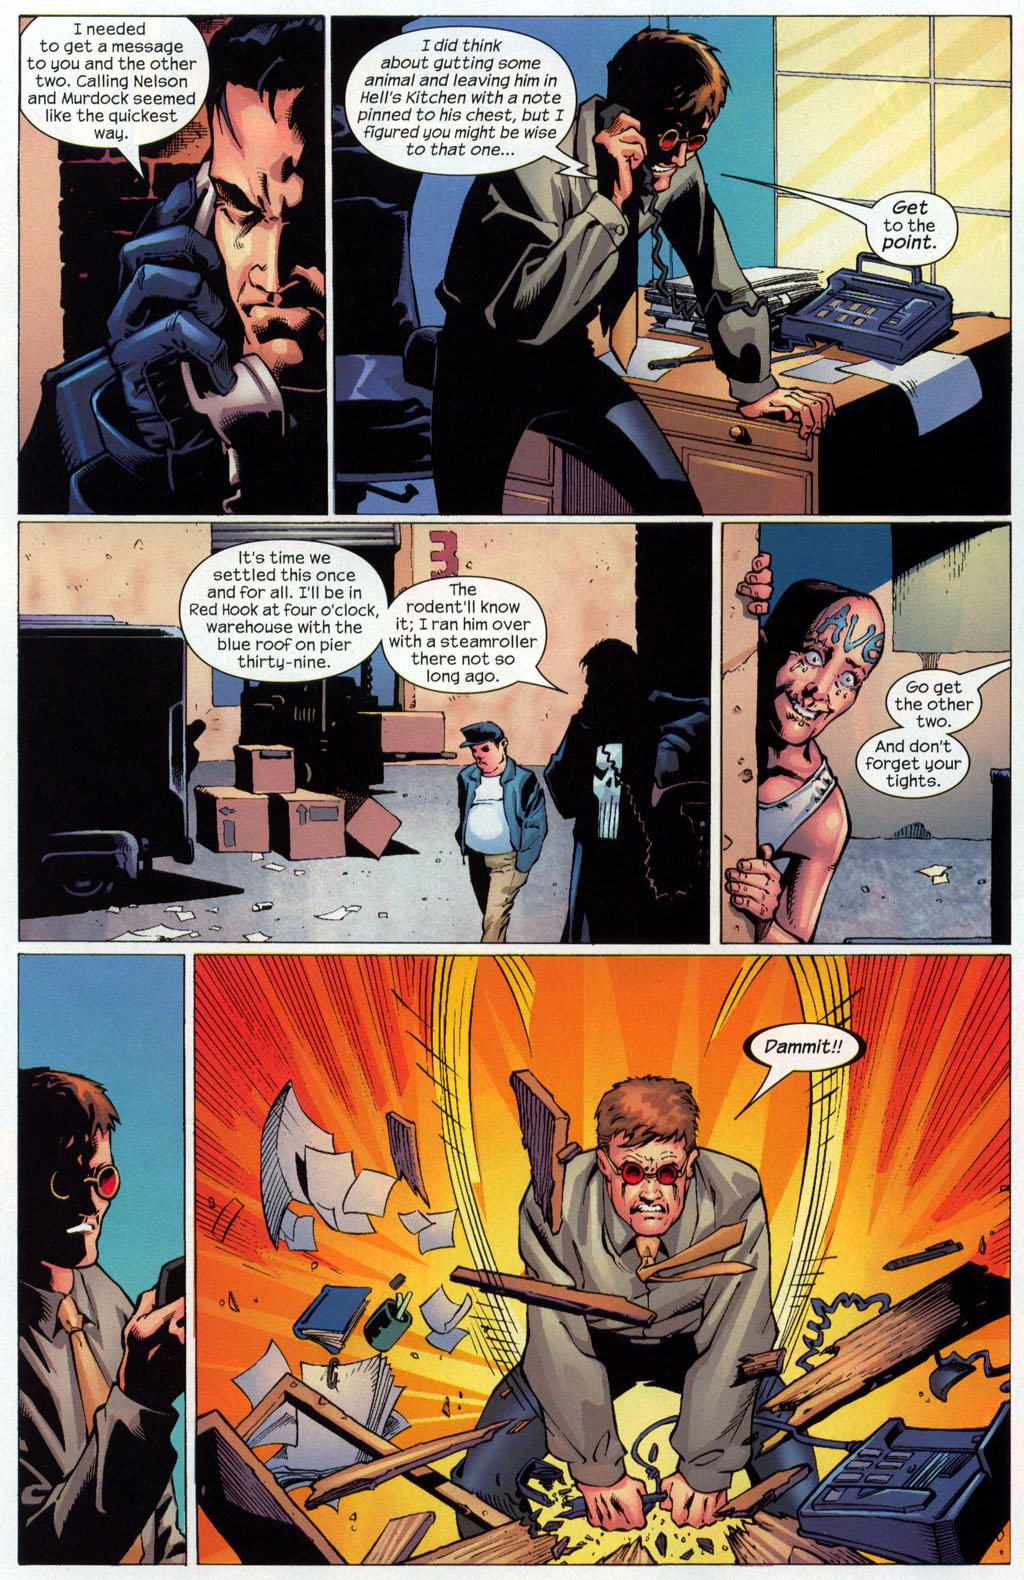 The Punisher (2001) issue 36 - Confederacy of Dunces #04 - Page 16